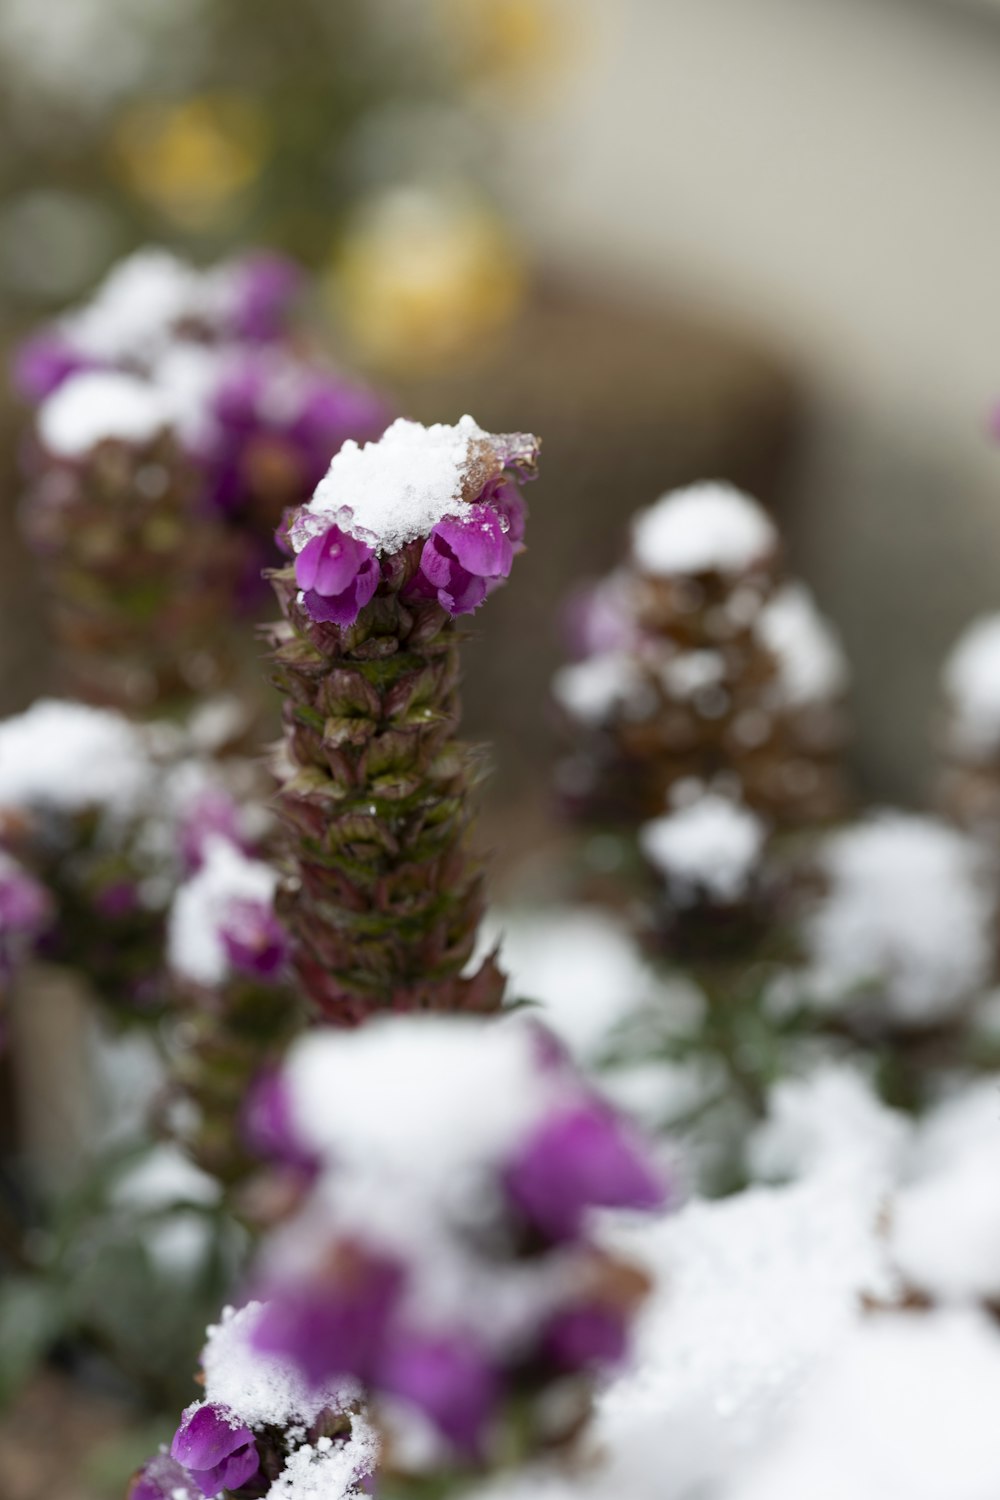 a close up of a purple flower with snow on it